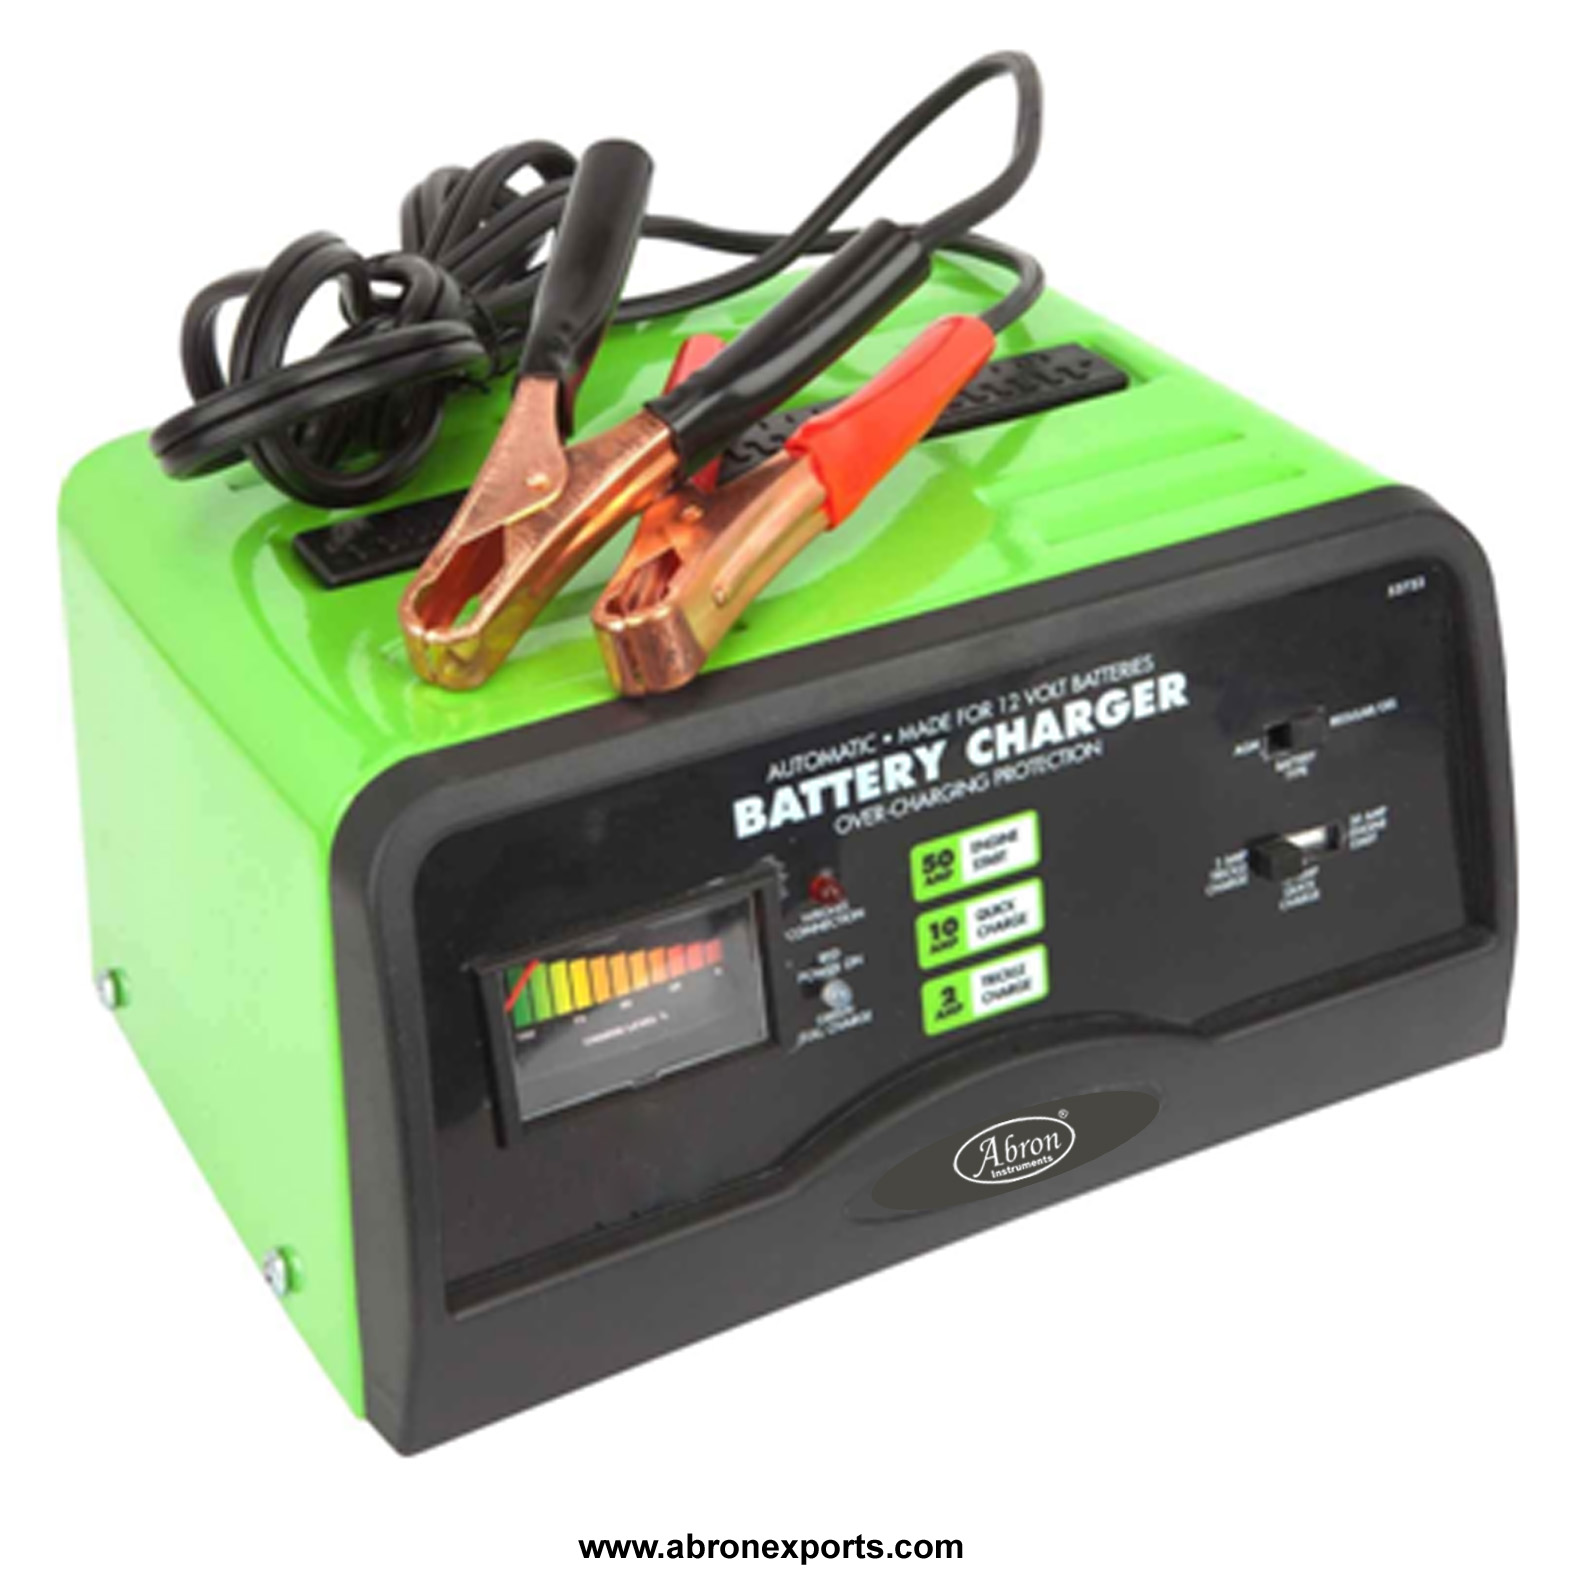 Battery charger 2/ 3/ 5 amp Input 220v ac output 0 12v abron AE-1206